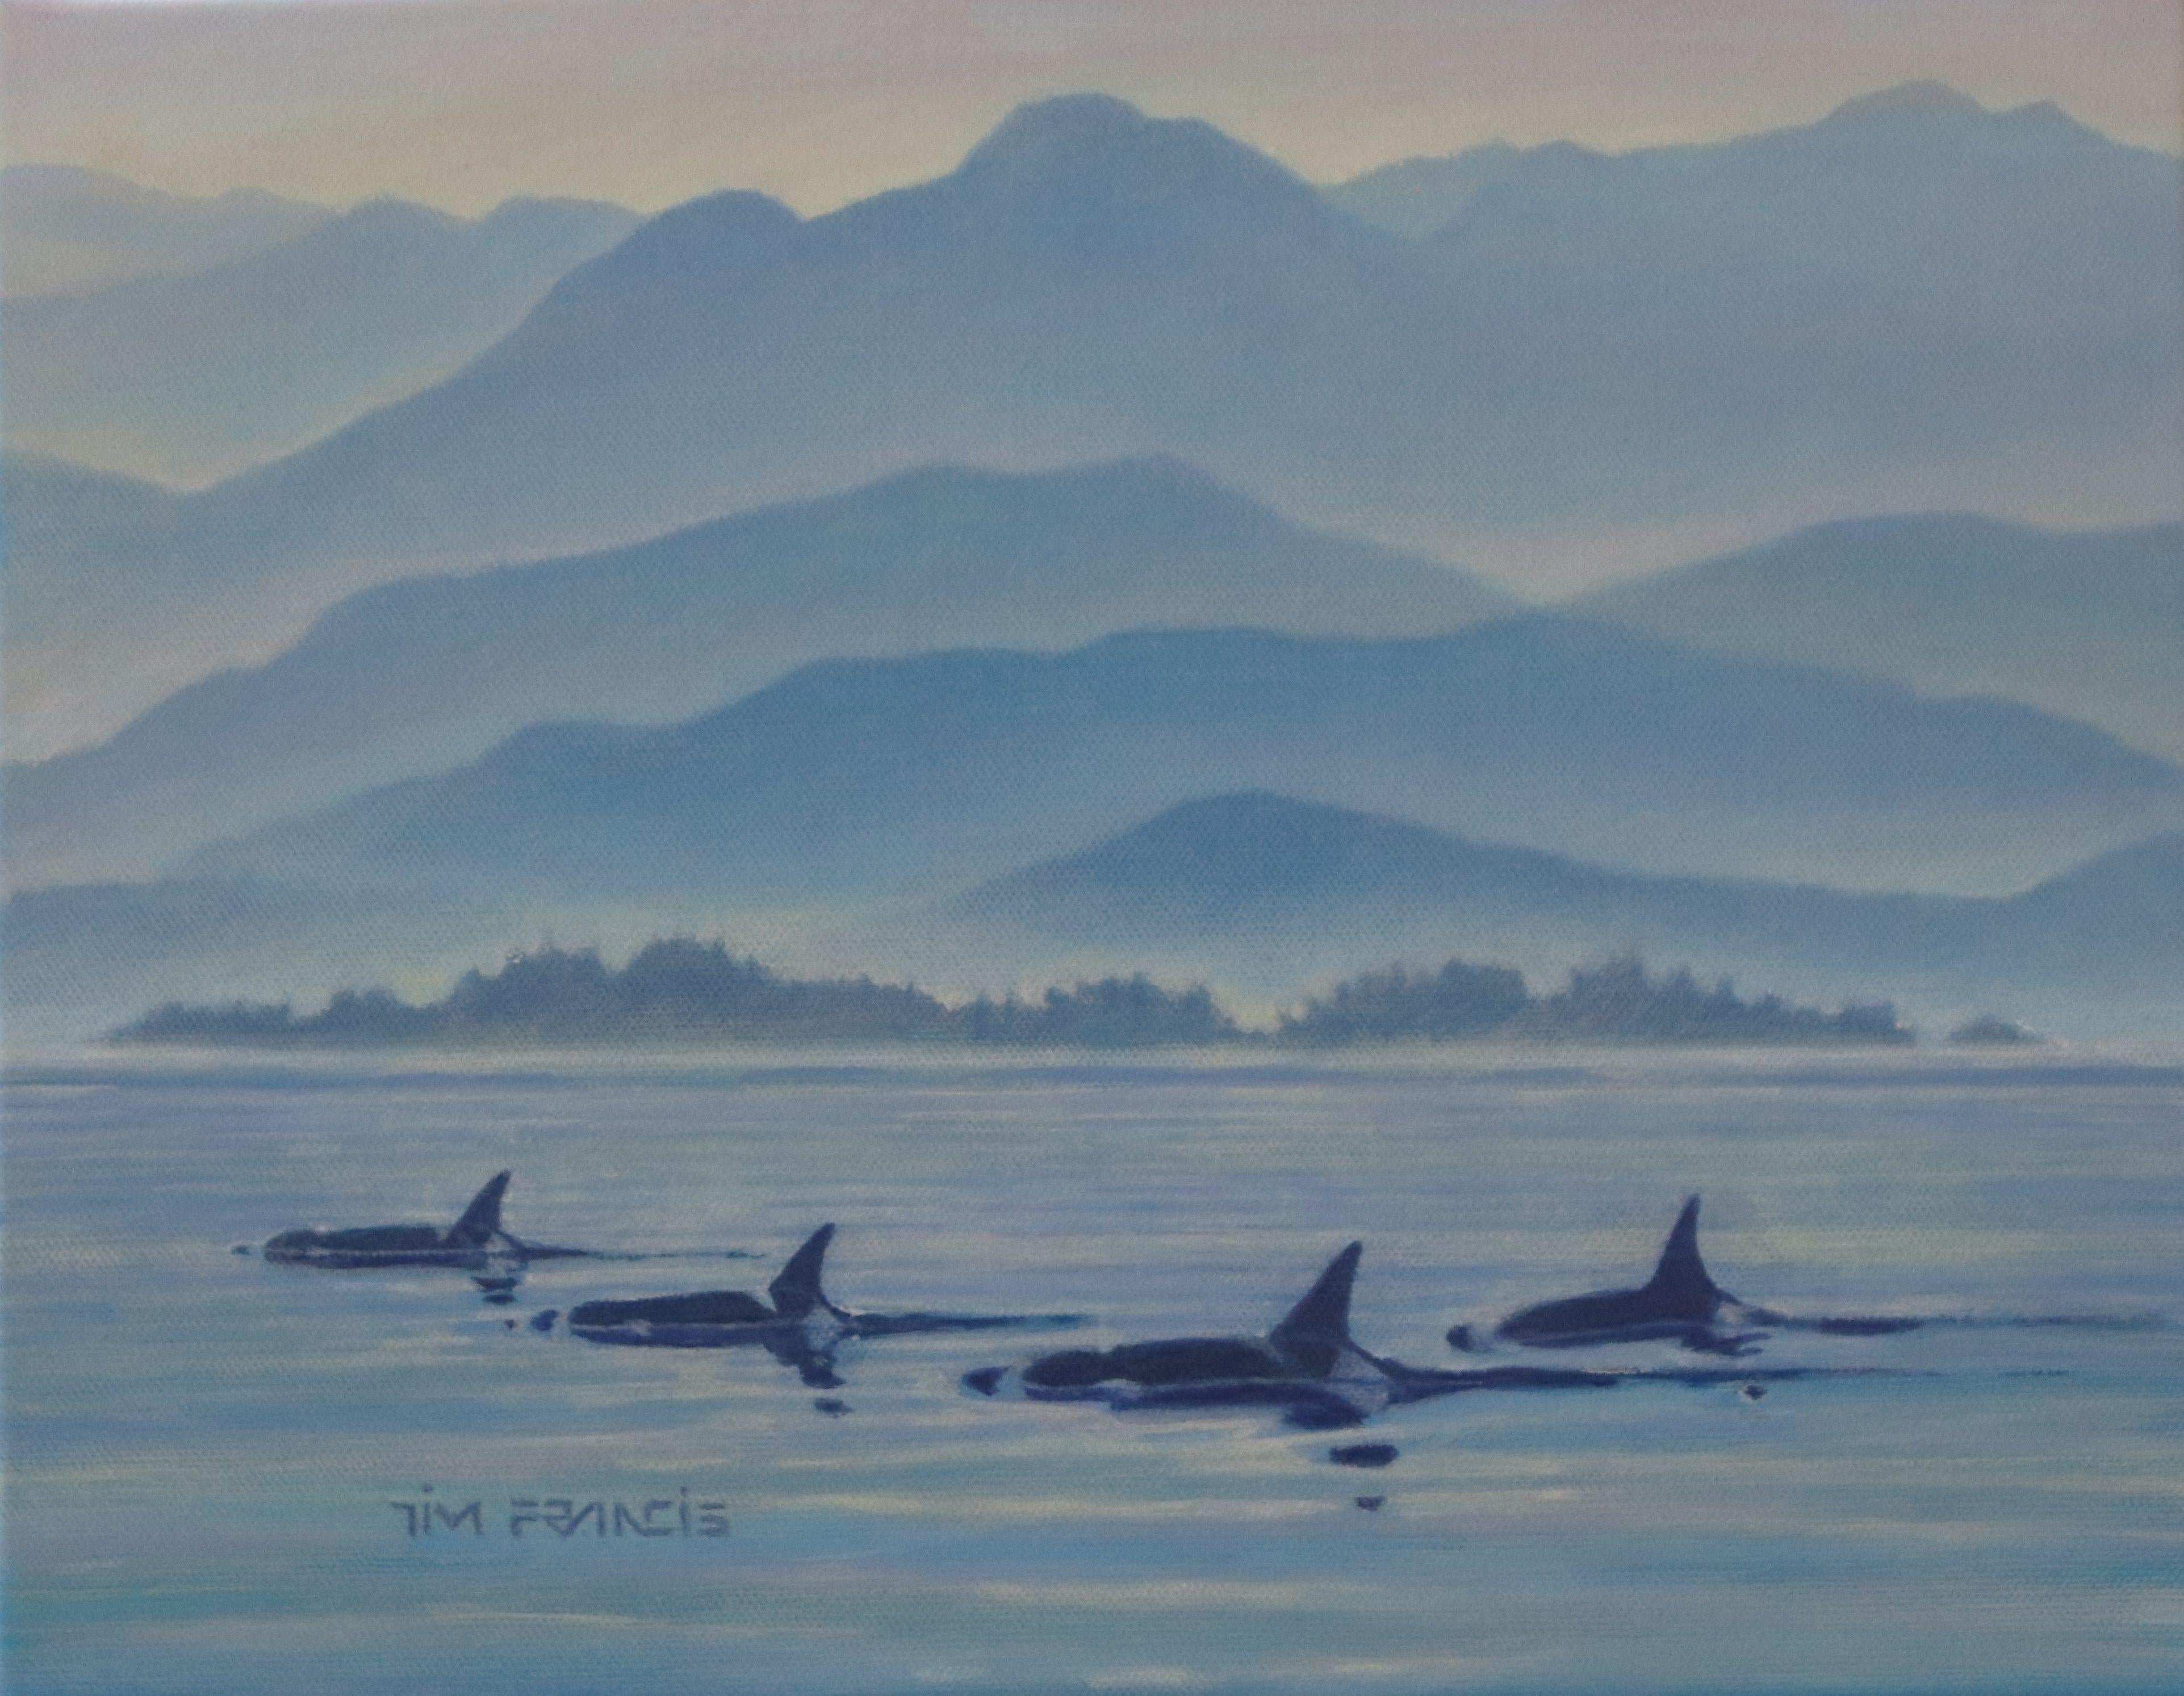 Cobalt Blue, Cadmium Yellow and Theo Violet were used in the creation of this acrylic of four Orcas hunting in the Salish Sea off of British Columbia's southern coast. :: Painting :: Fine Art :: This piece comes with an official certificate of